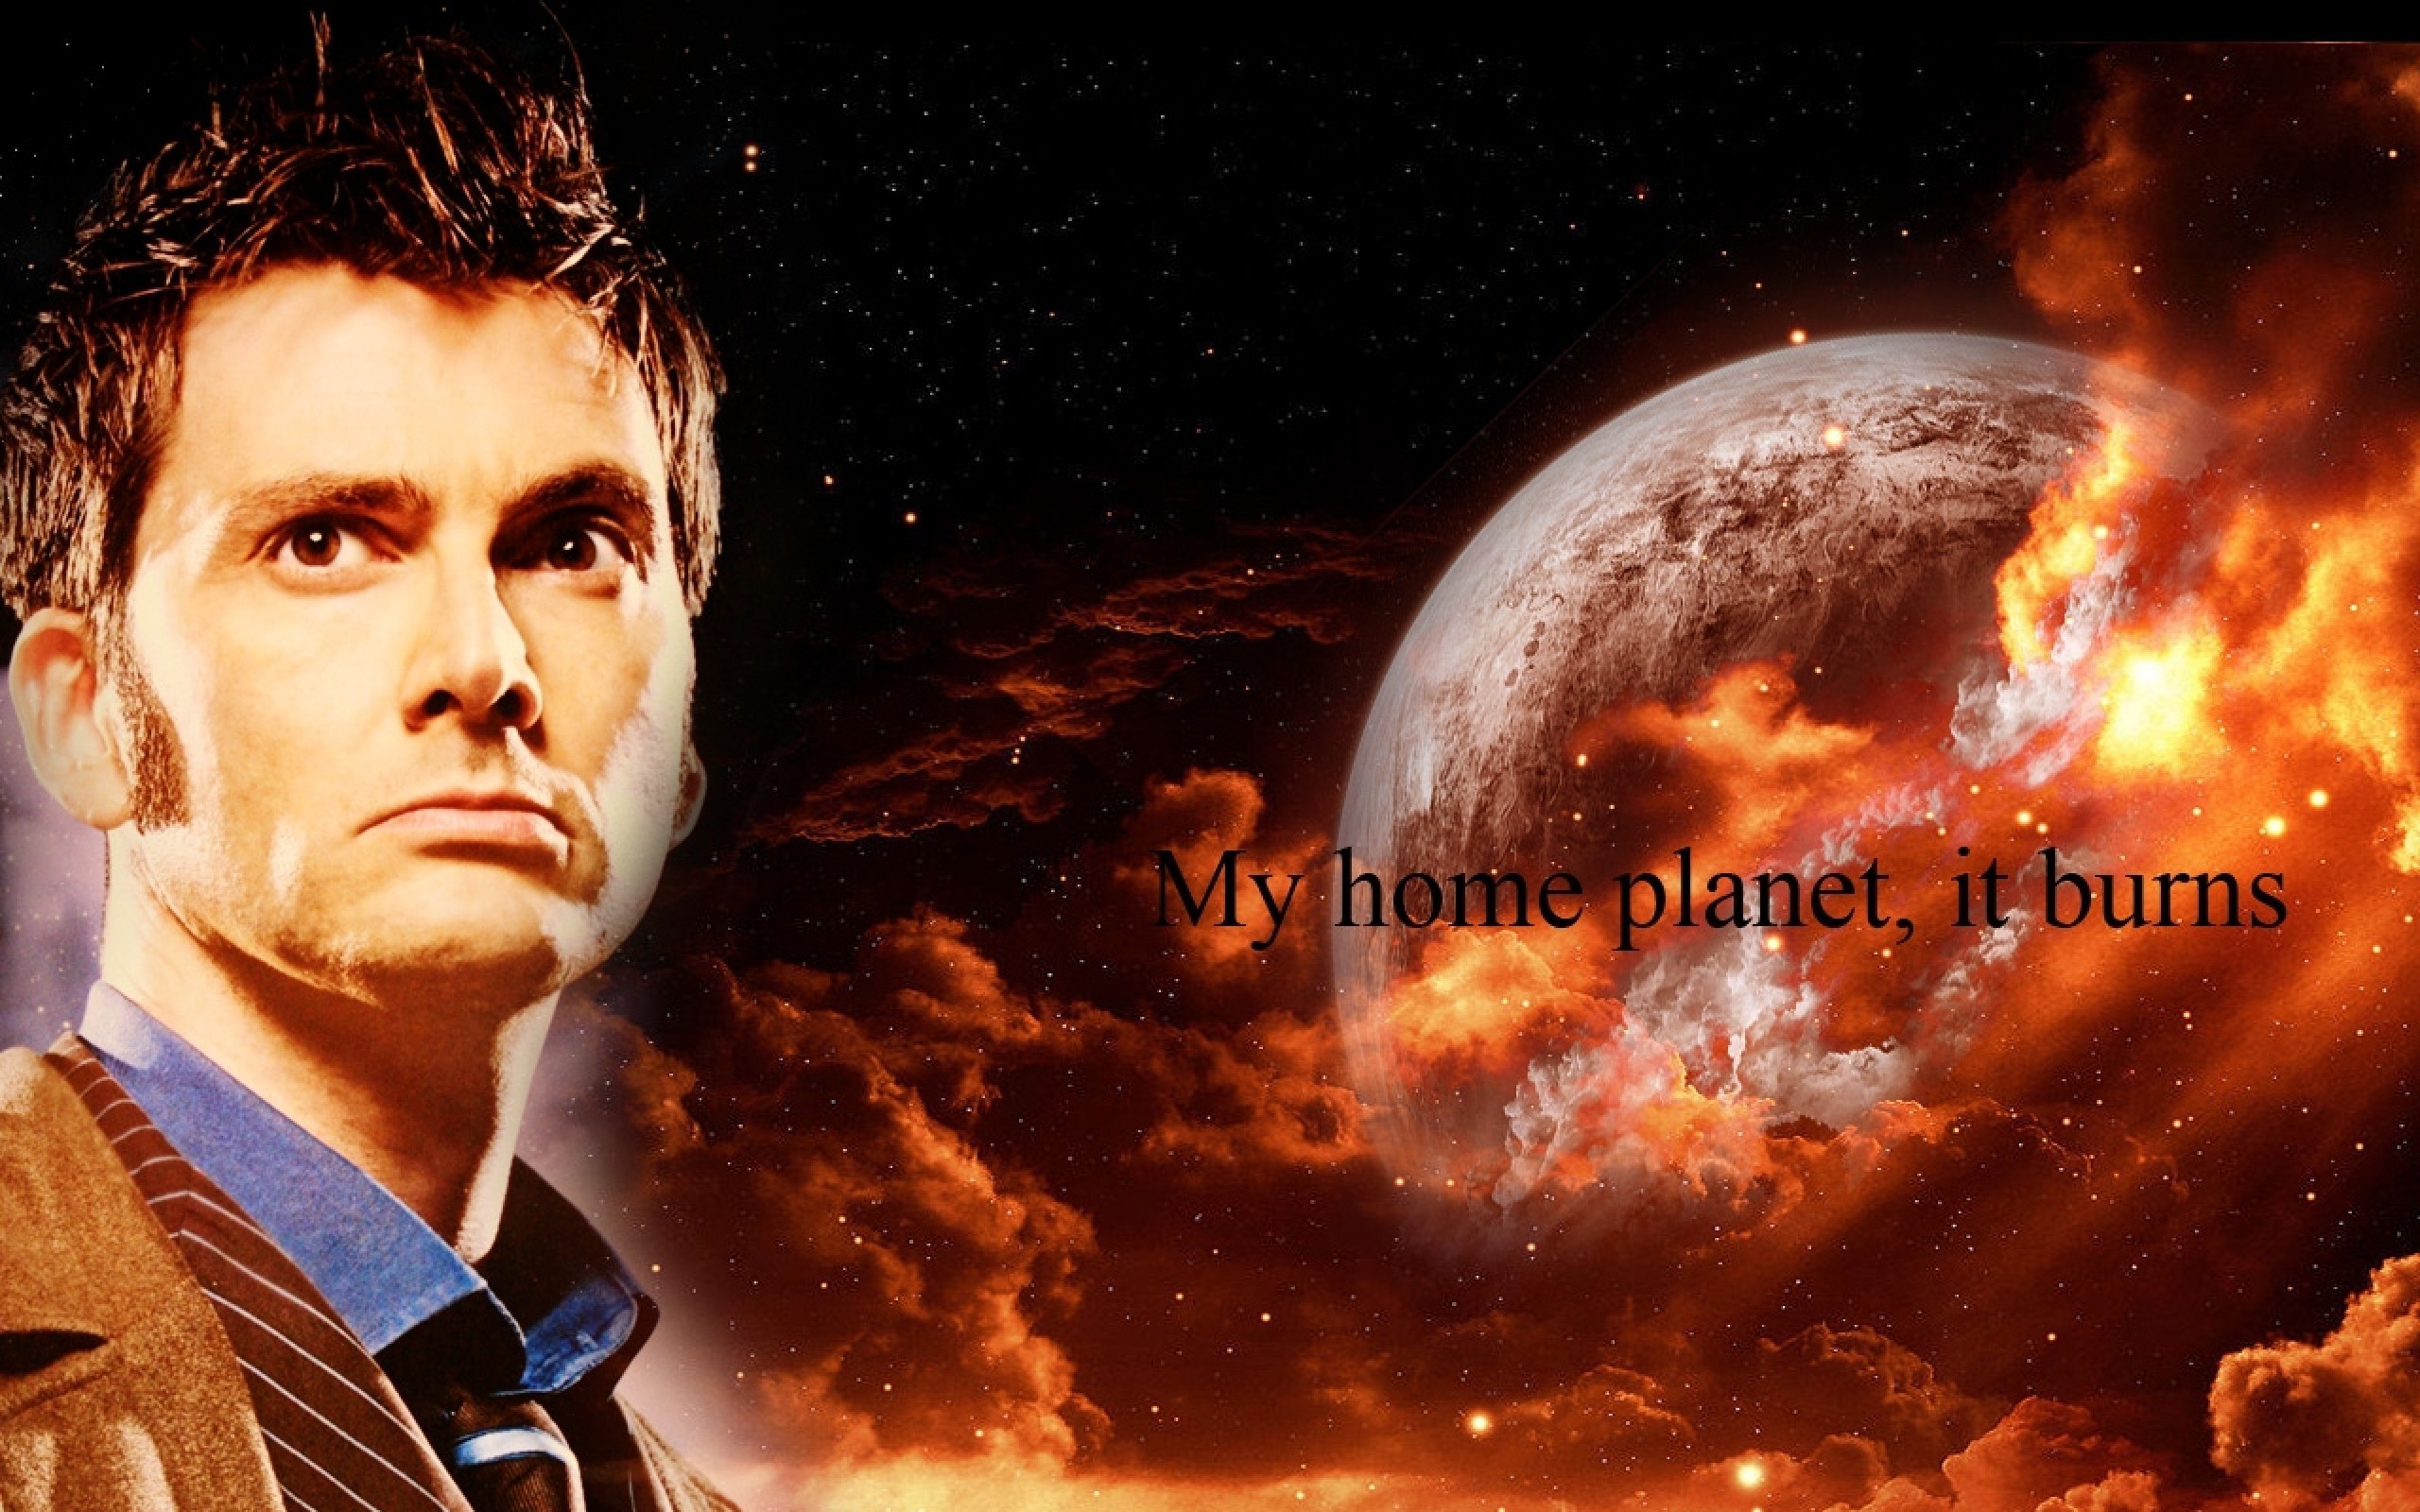 Doctor Who, The Doctor, TARDIS, David Tennant, Gallifrey, Tenth Doctor, Planet, Quote Wallpapers HD / Desktop and Mobile Backgrounds